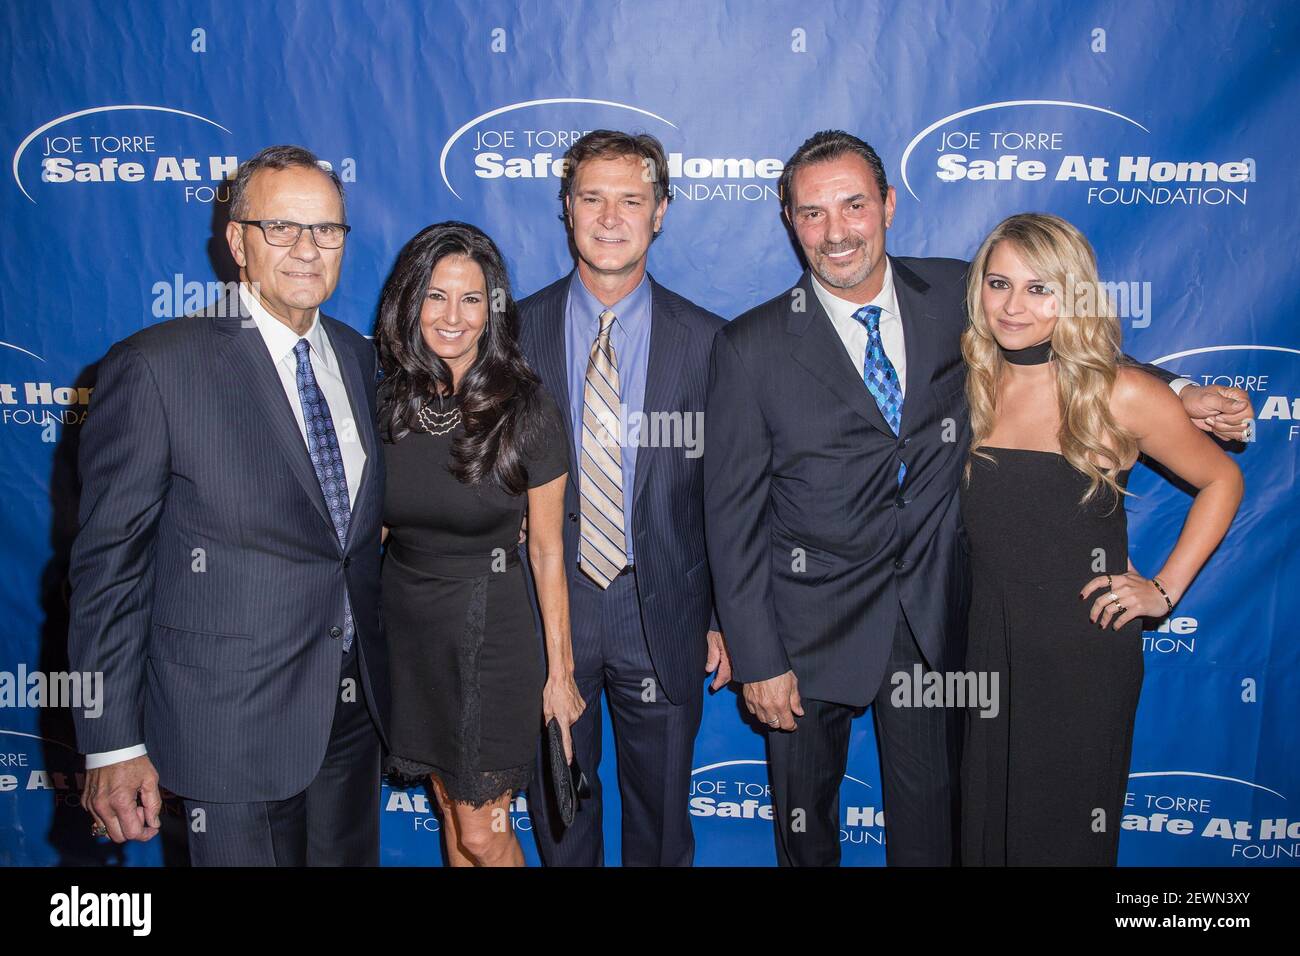 Joe Torre, Don and Lori Mattingly, Lee Mazzilli and daughter Lacey